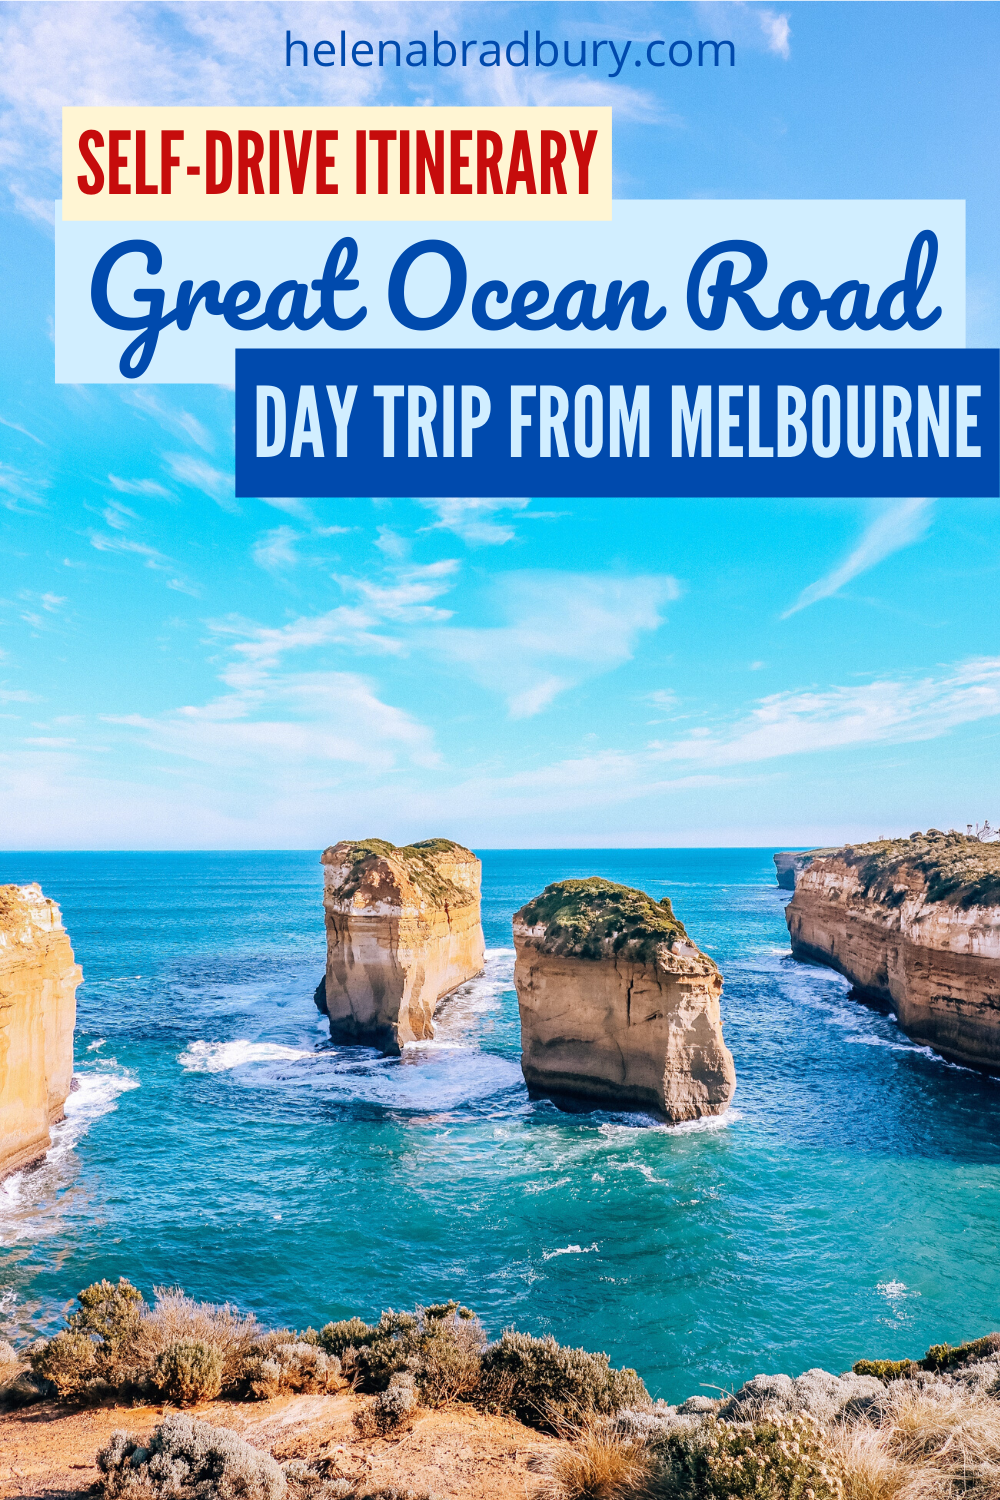 Great Ocean Road day trip from Melbourne: a self-drive itinerary